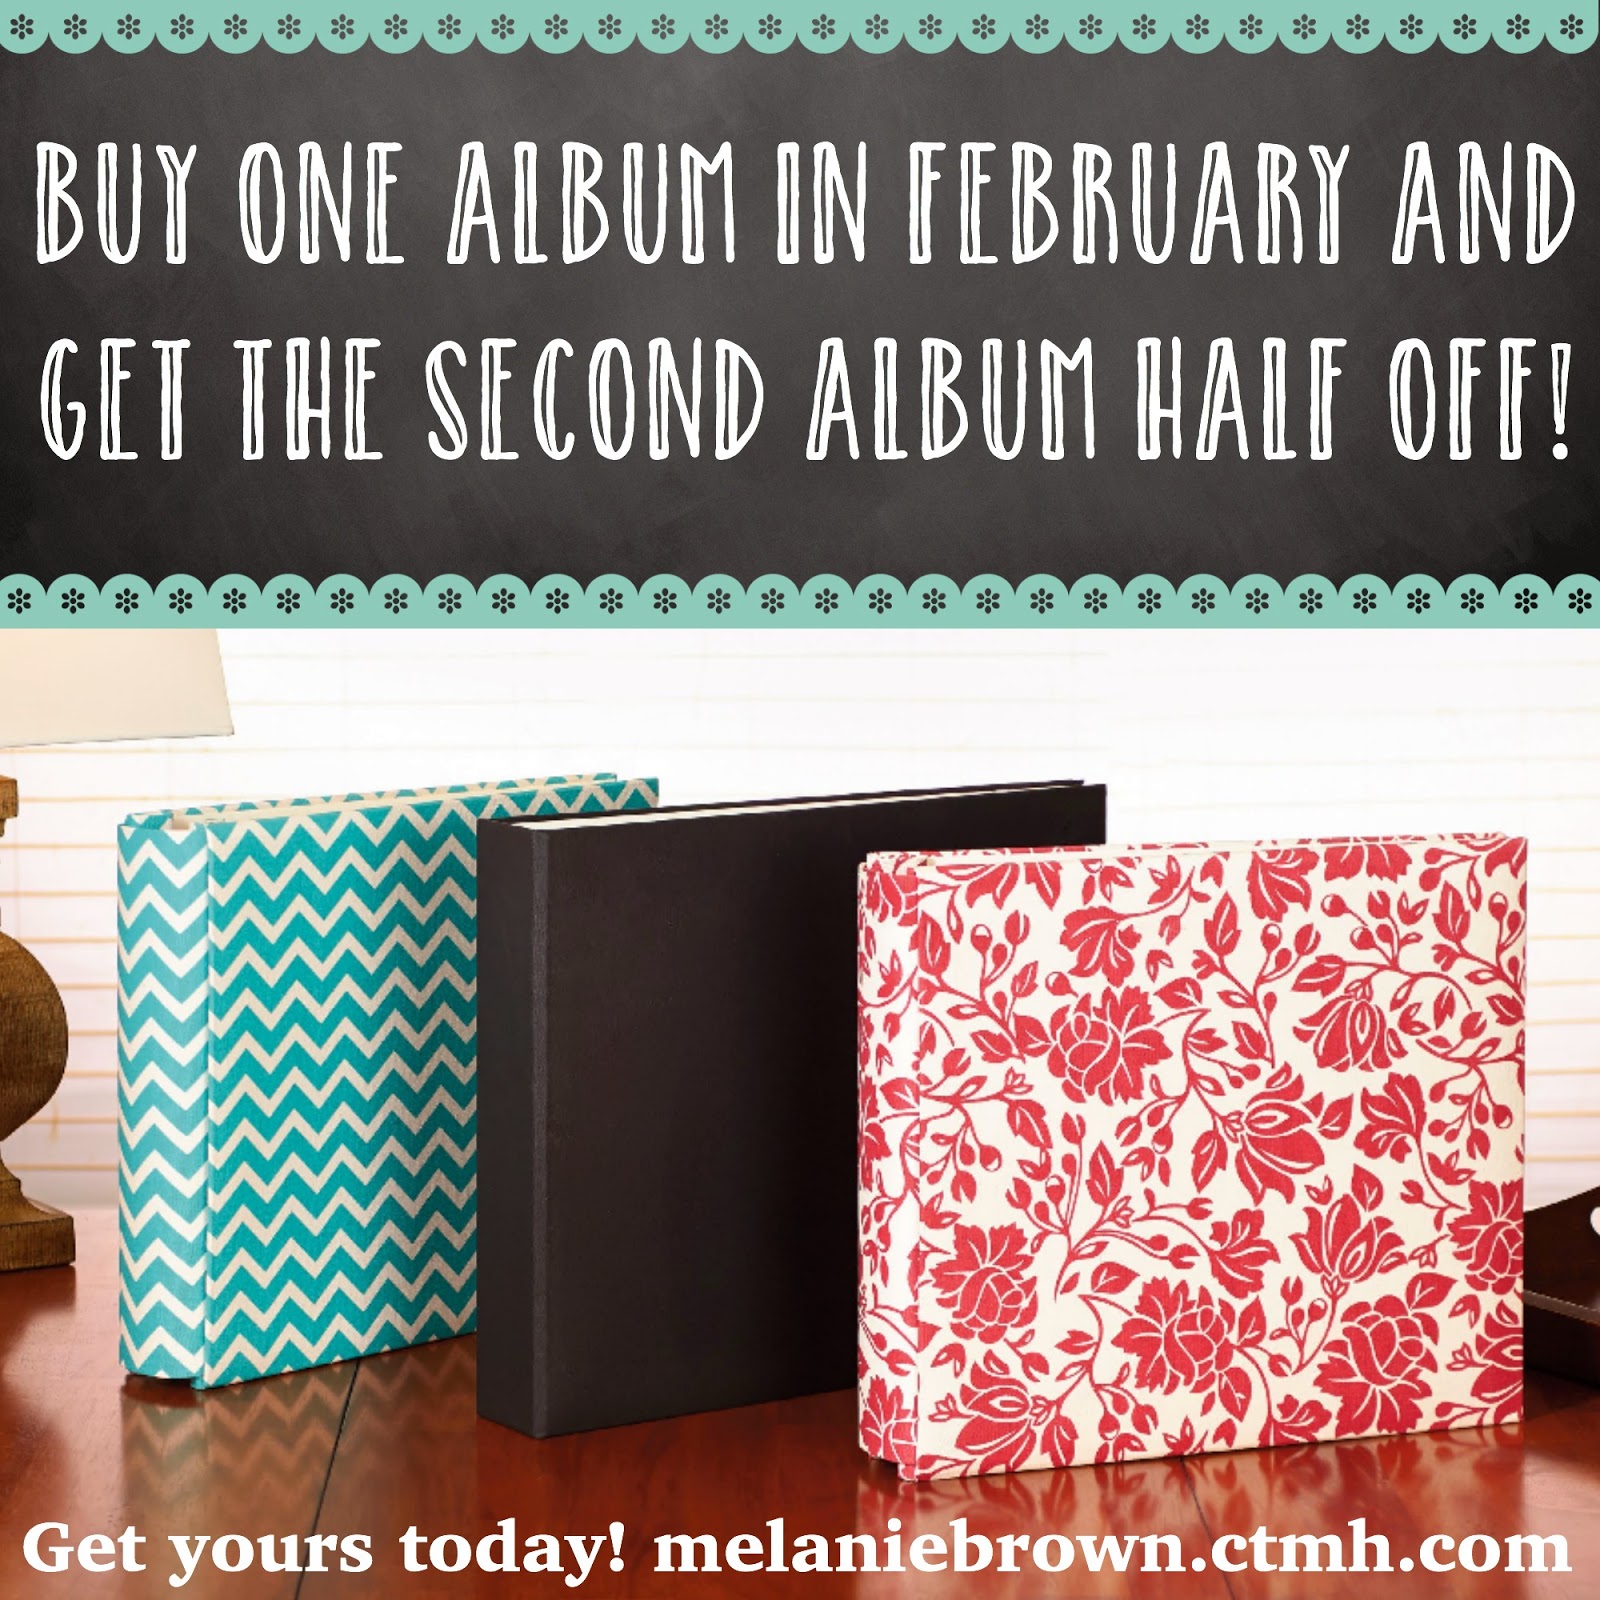 Buy one album get the secomd for free in February!